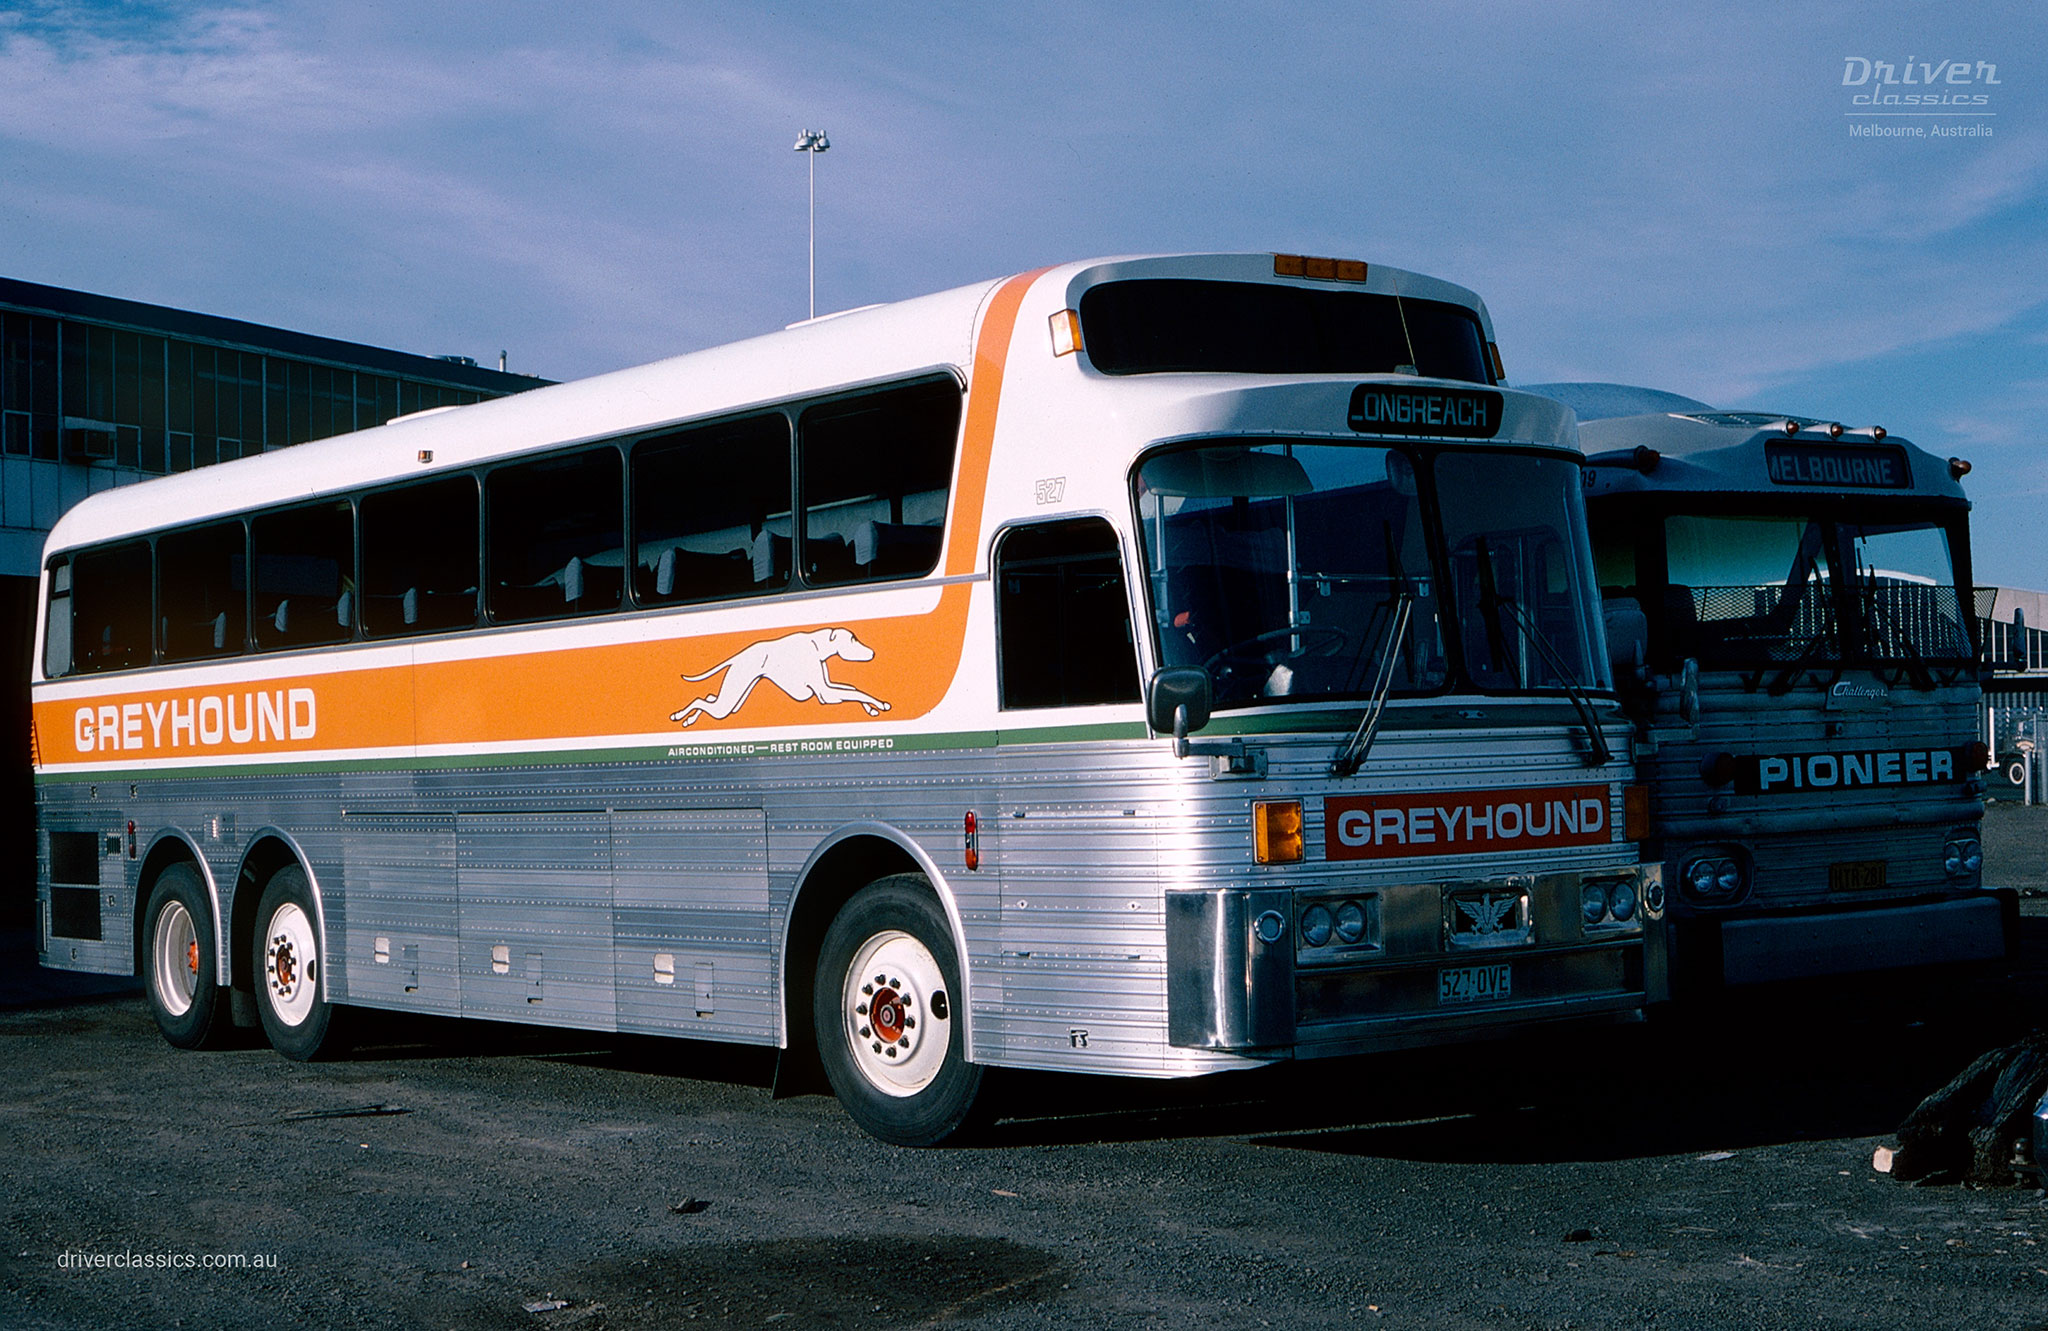 Eagle Model 05 bus, 1983 model with Greyhound livery with Pioneer MCI MC7. Photo taken in Melbourne VIC in June 1984.